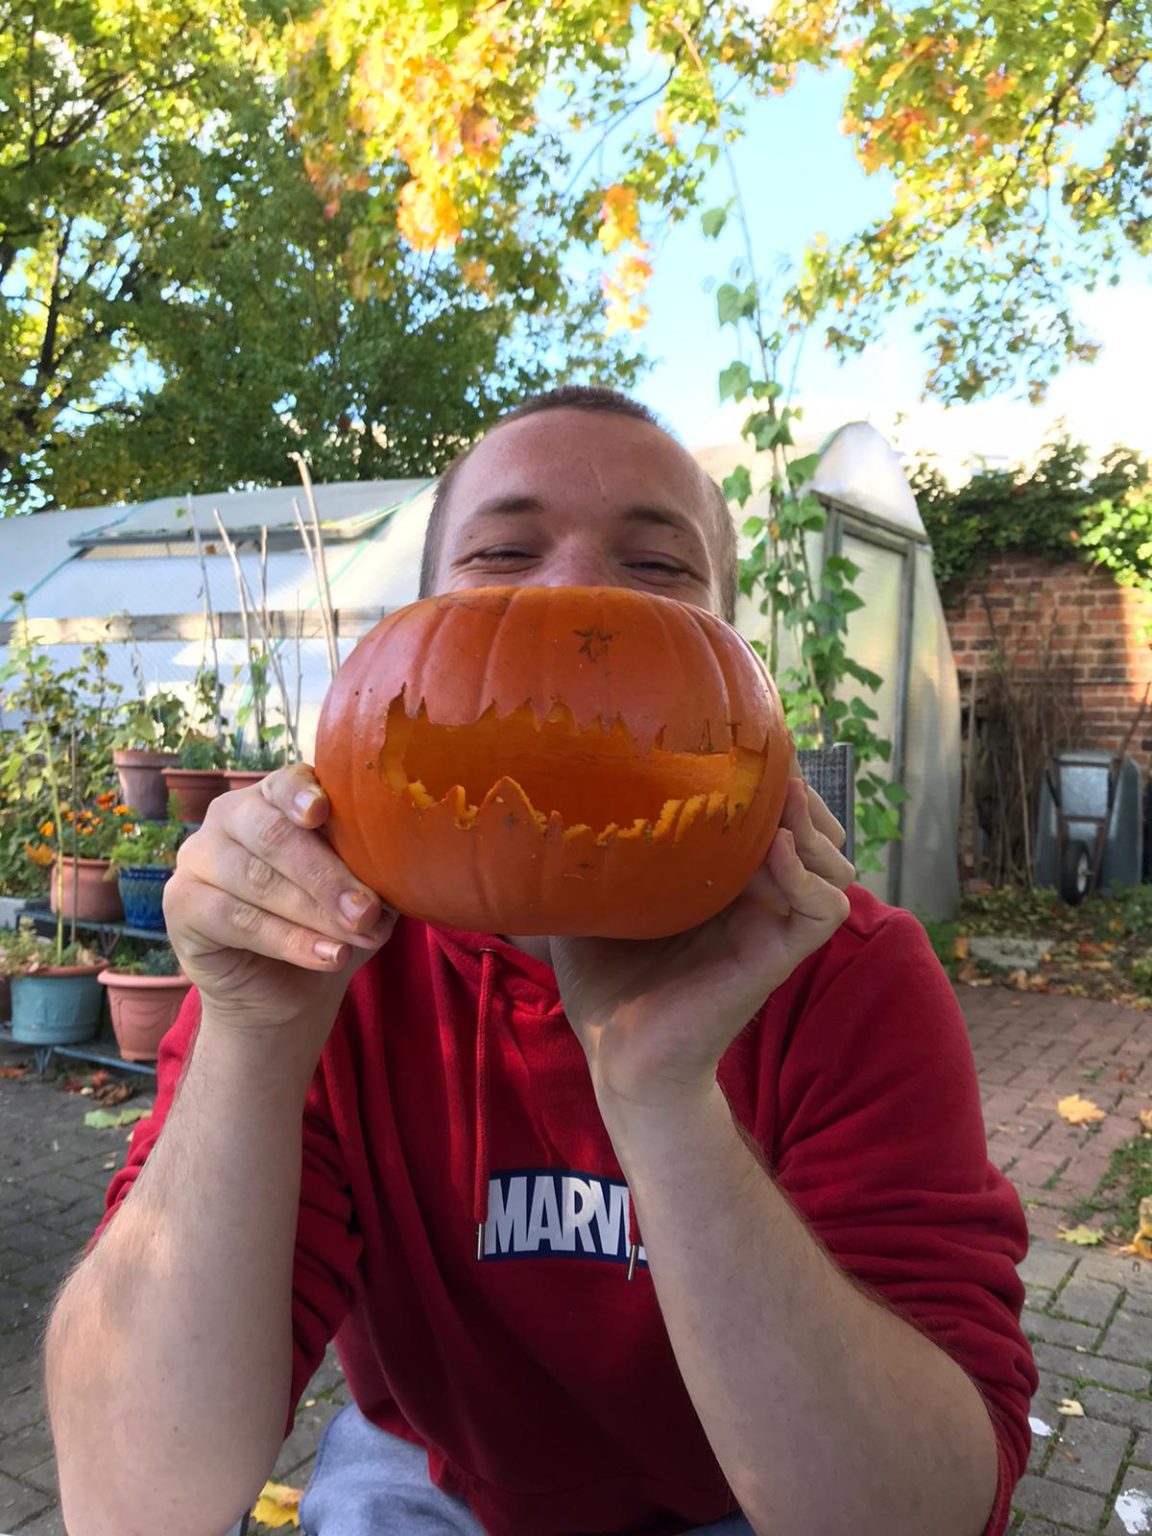 Getting ready for spooky season by carving our pumpkins